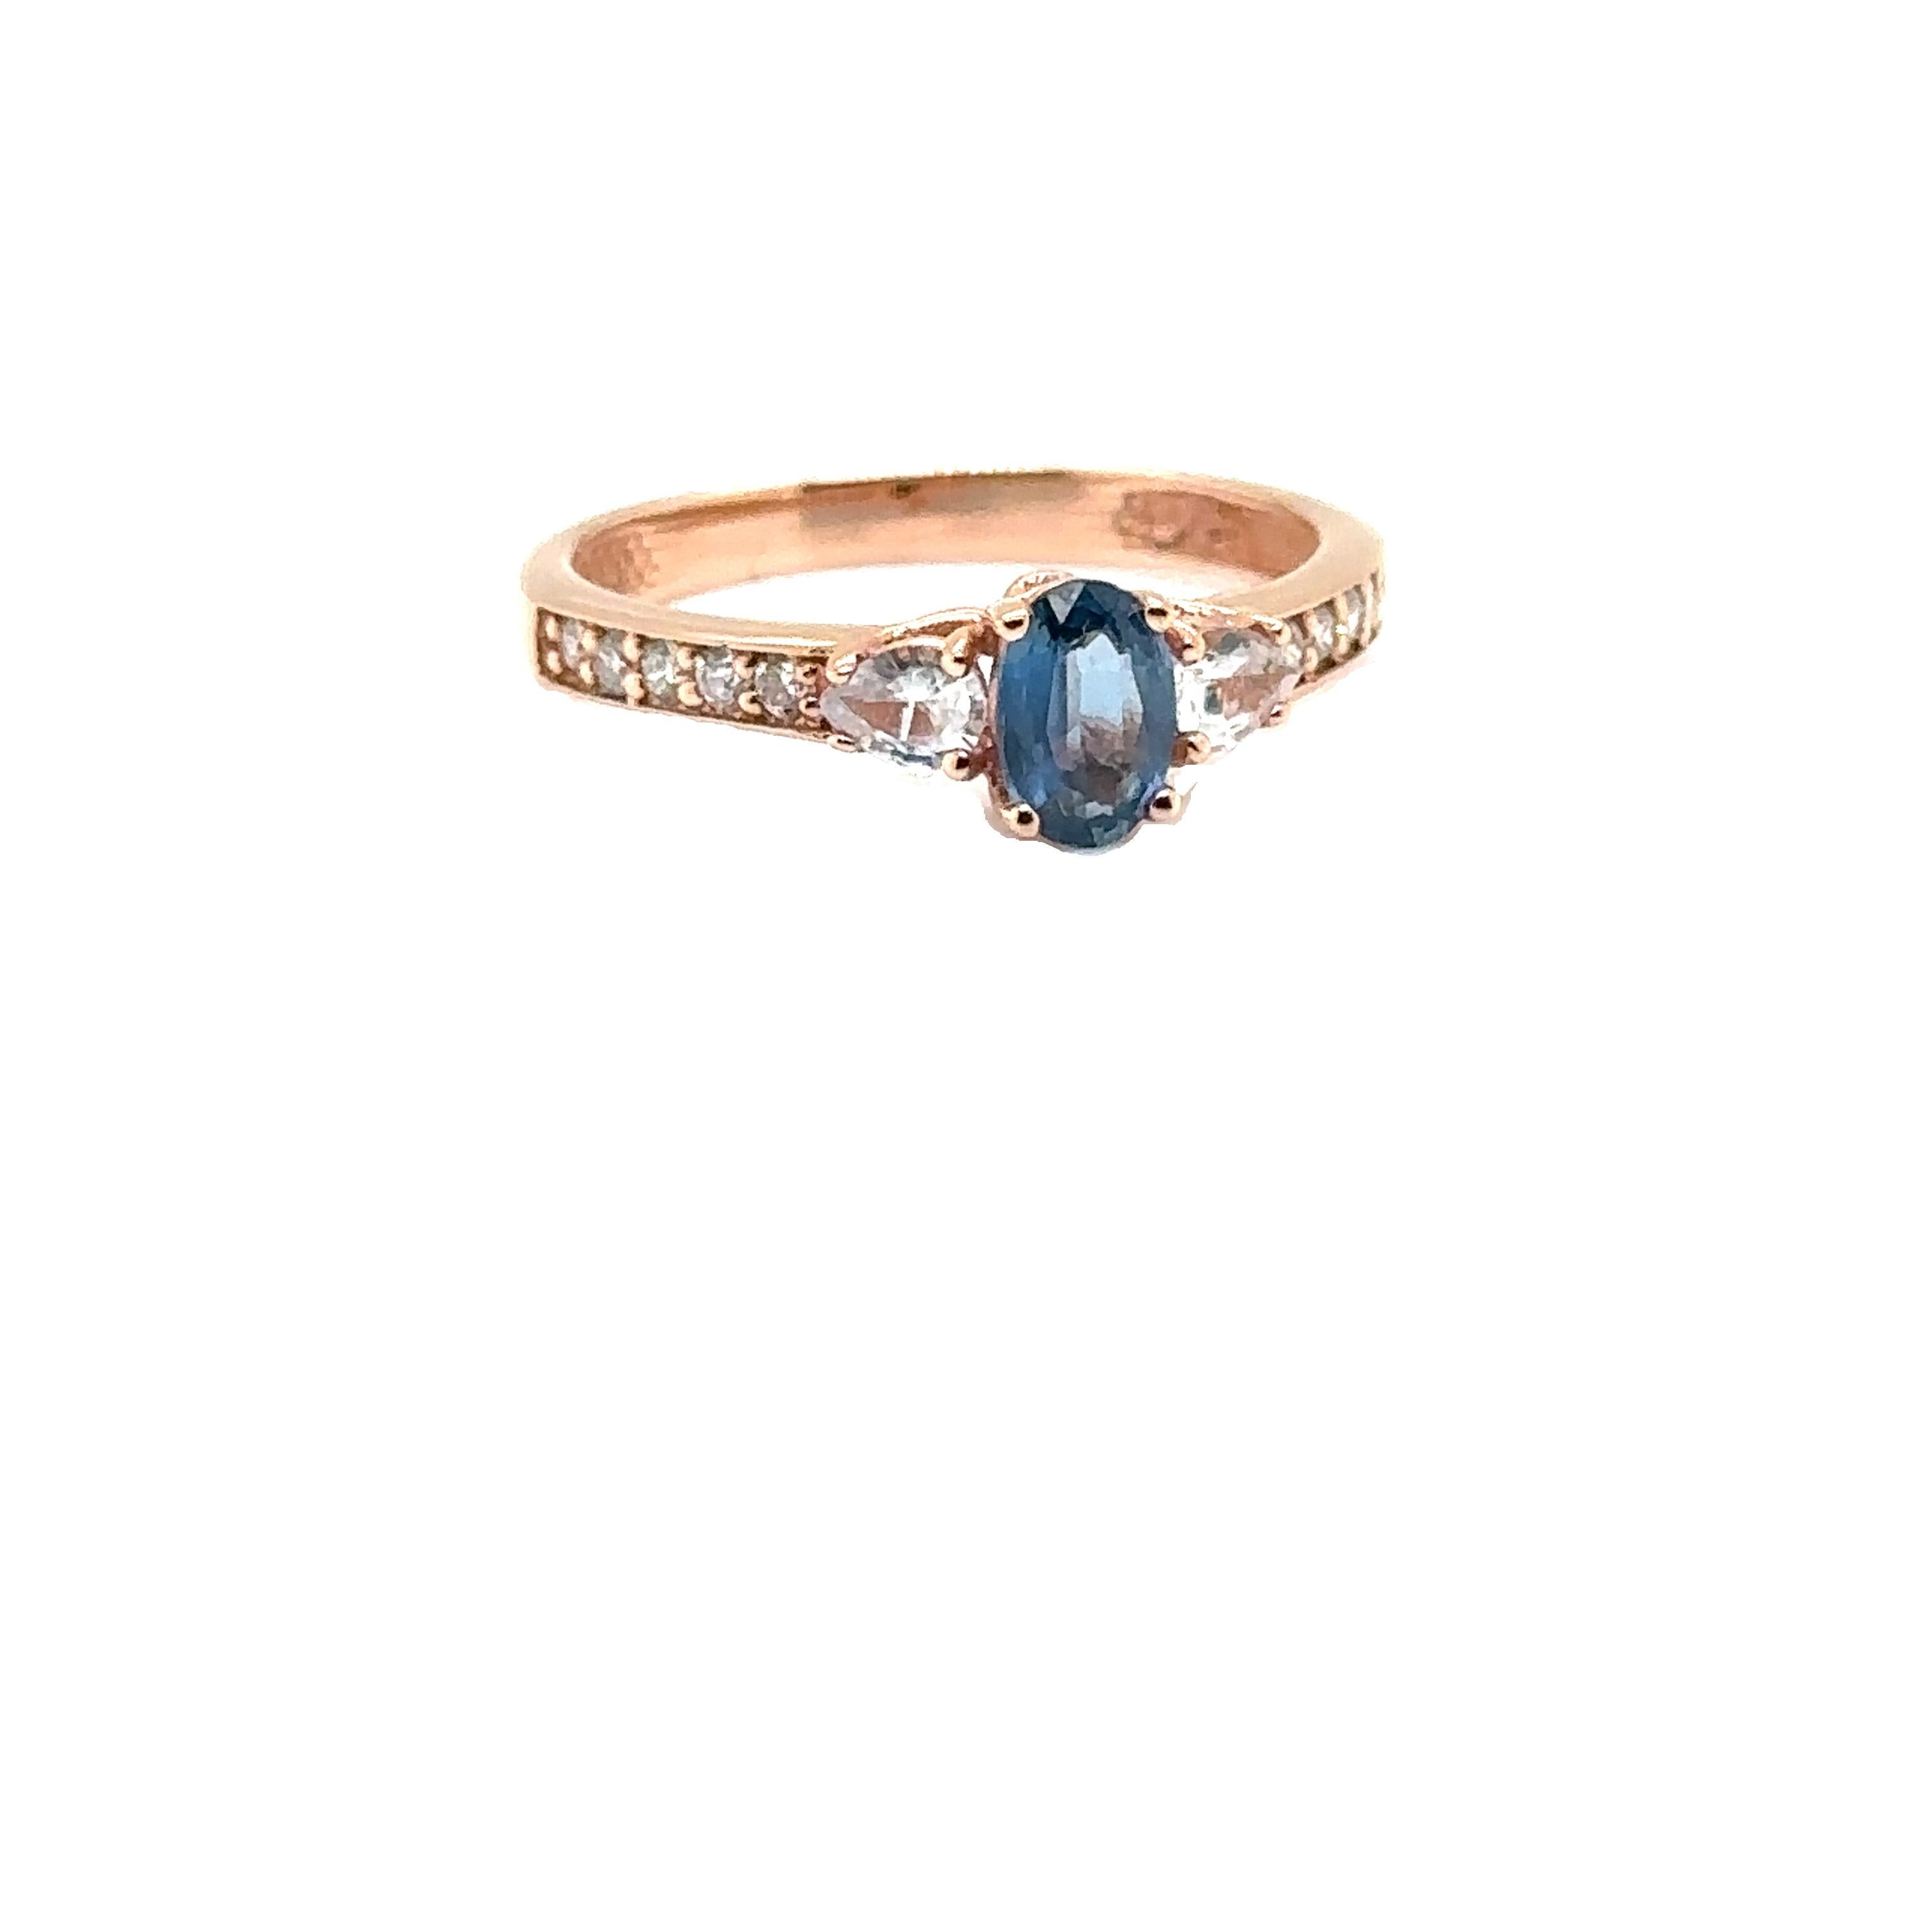 14K ROSE GOLD OVAL SAPPHIRE RING with WHITE SAPPHIRES & DIAMONDS 
Metal: 14K ROSE GOLD
Diamond Info: GH-SI DIAMONDS 0.20CT
Stones Info: 6X4 OVAL SAPPHIRE 0.60CT
       4x3 PEARSHAPE WHITE SAPPHIRES 0.20CT
Total Dia Weight: 0.20 cwt.
Total Stone